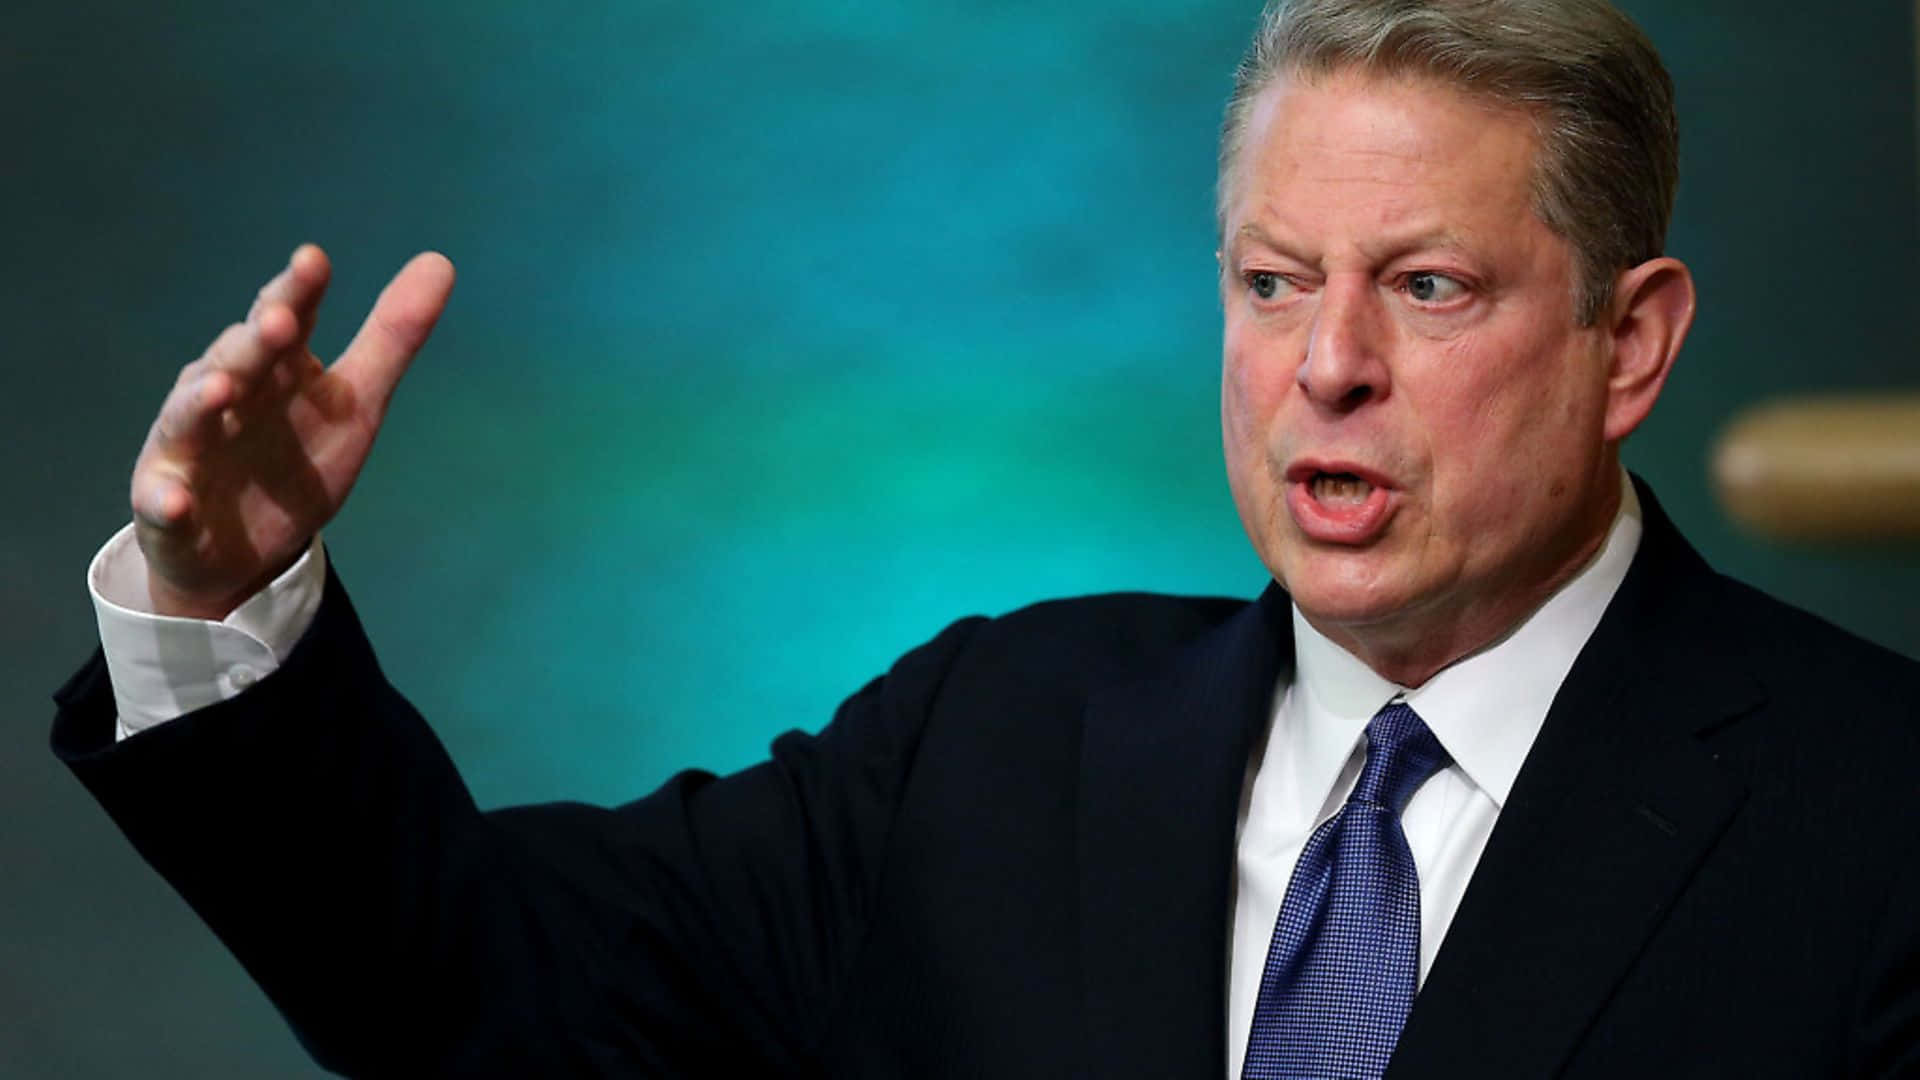 Al Gore Gesturing With His Right Hand Wallpaper